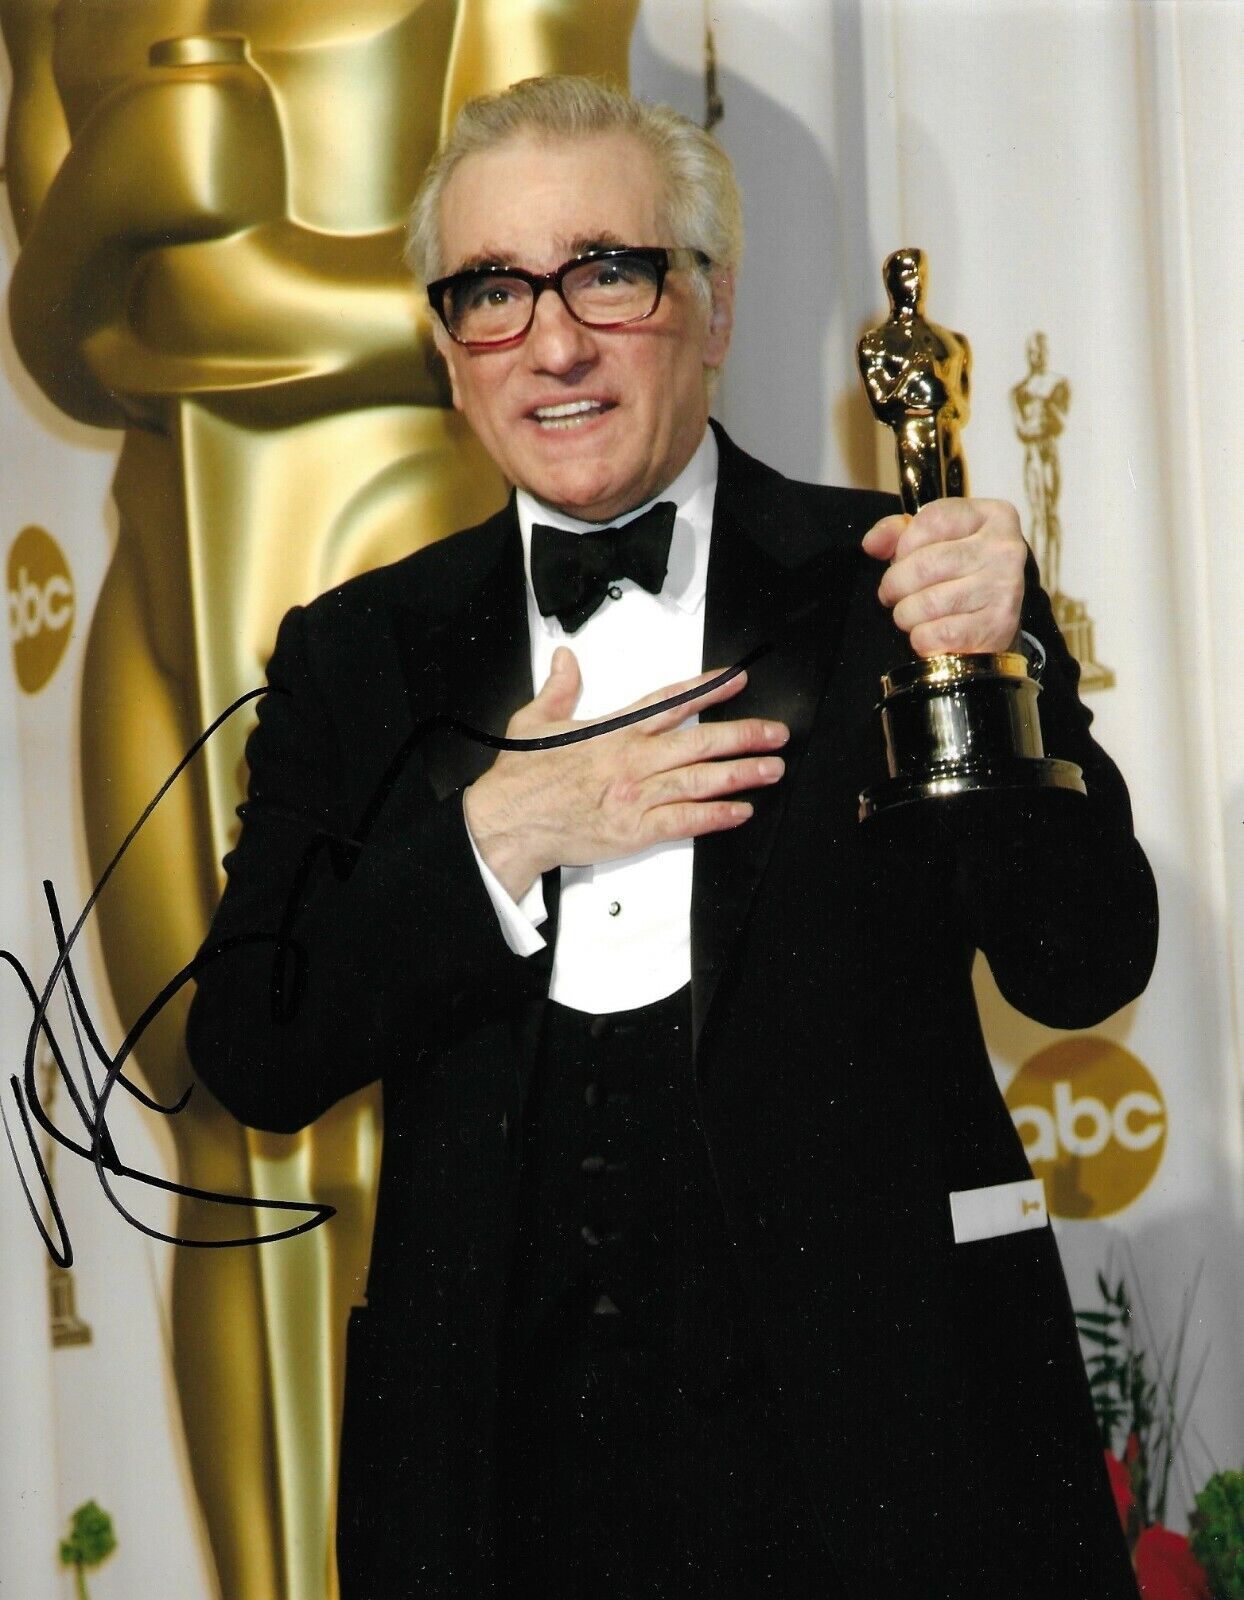 Martin Scorsese Signed Academy Awards 10x8 Photo Poster painting AFTAL